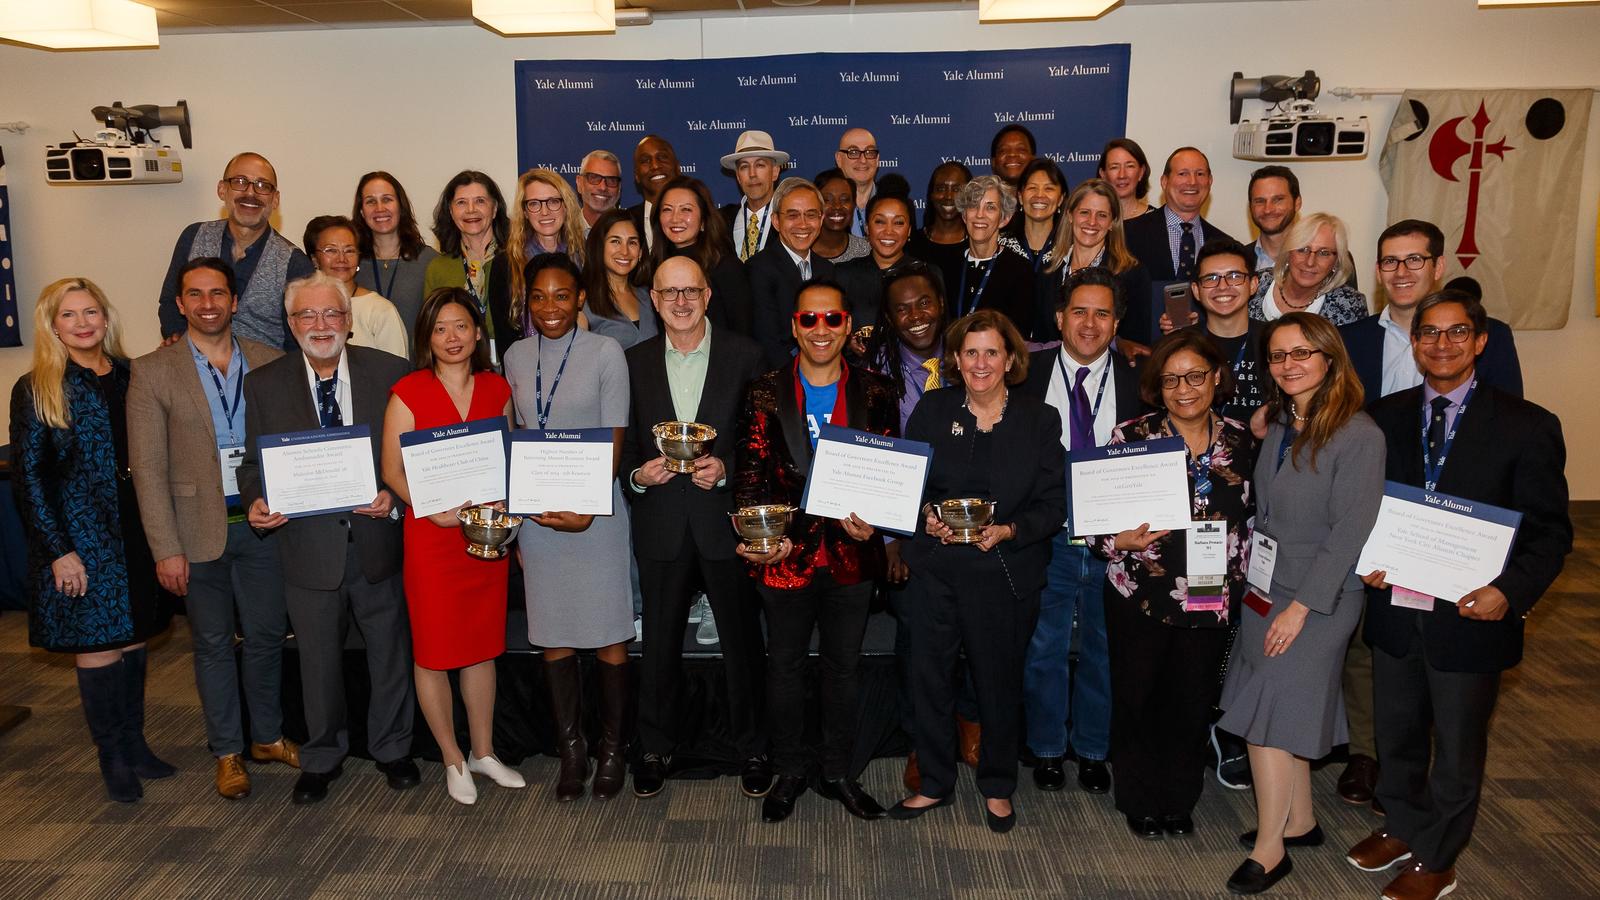 The recipients of the 2019 ASC Awards and the YAA Leadership and Excellence Awards